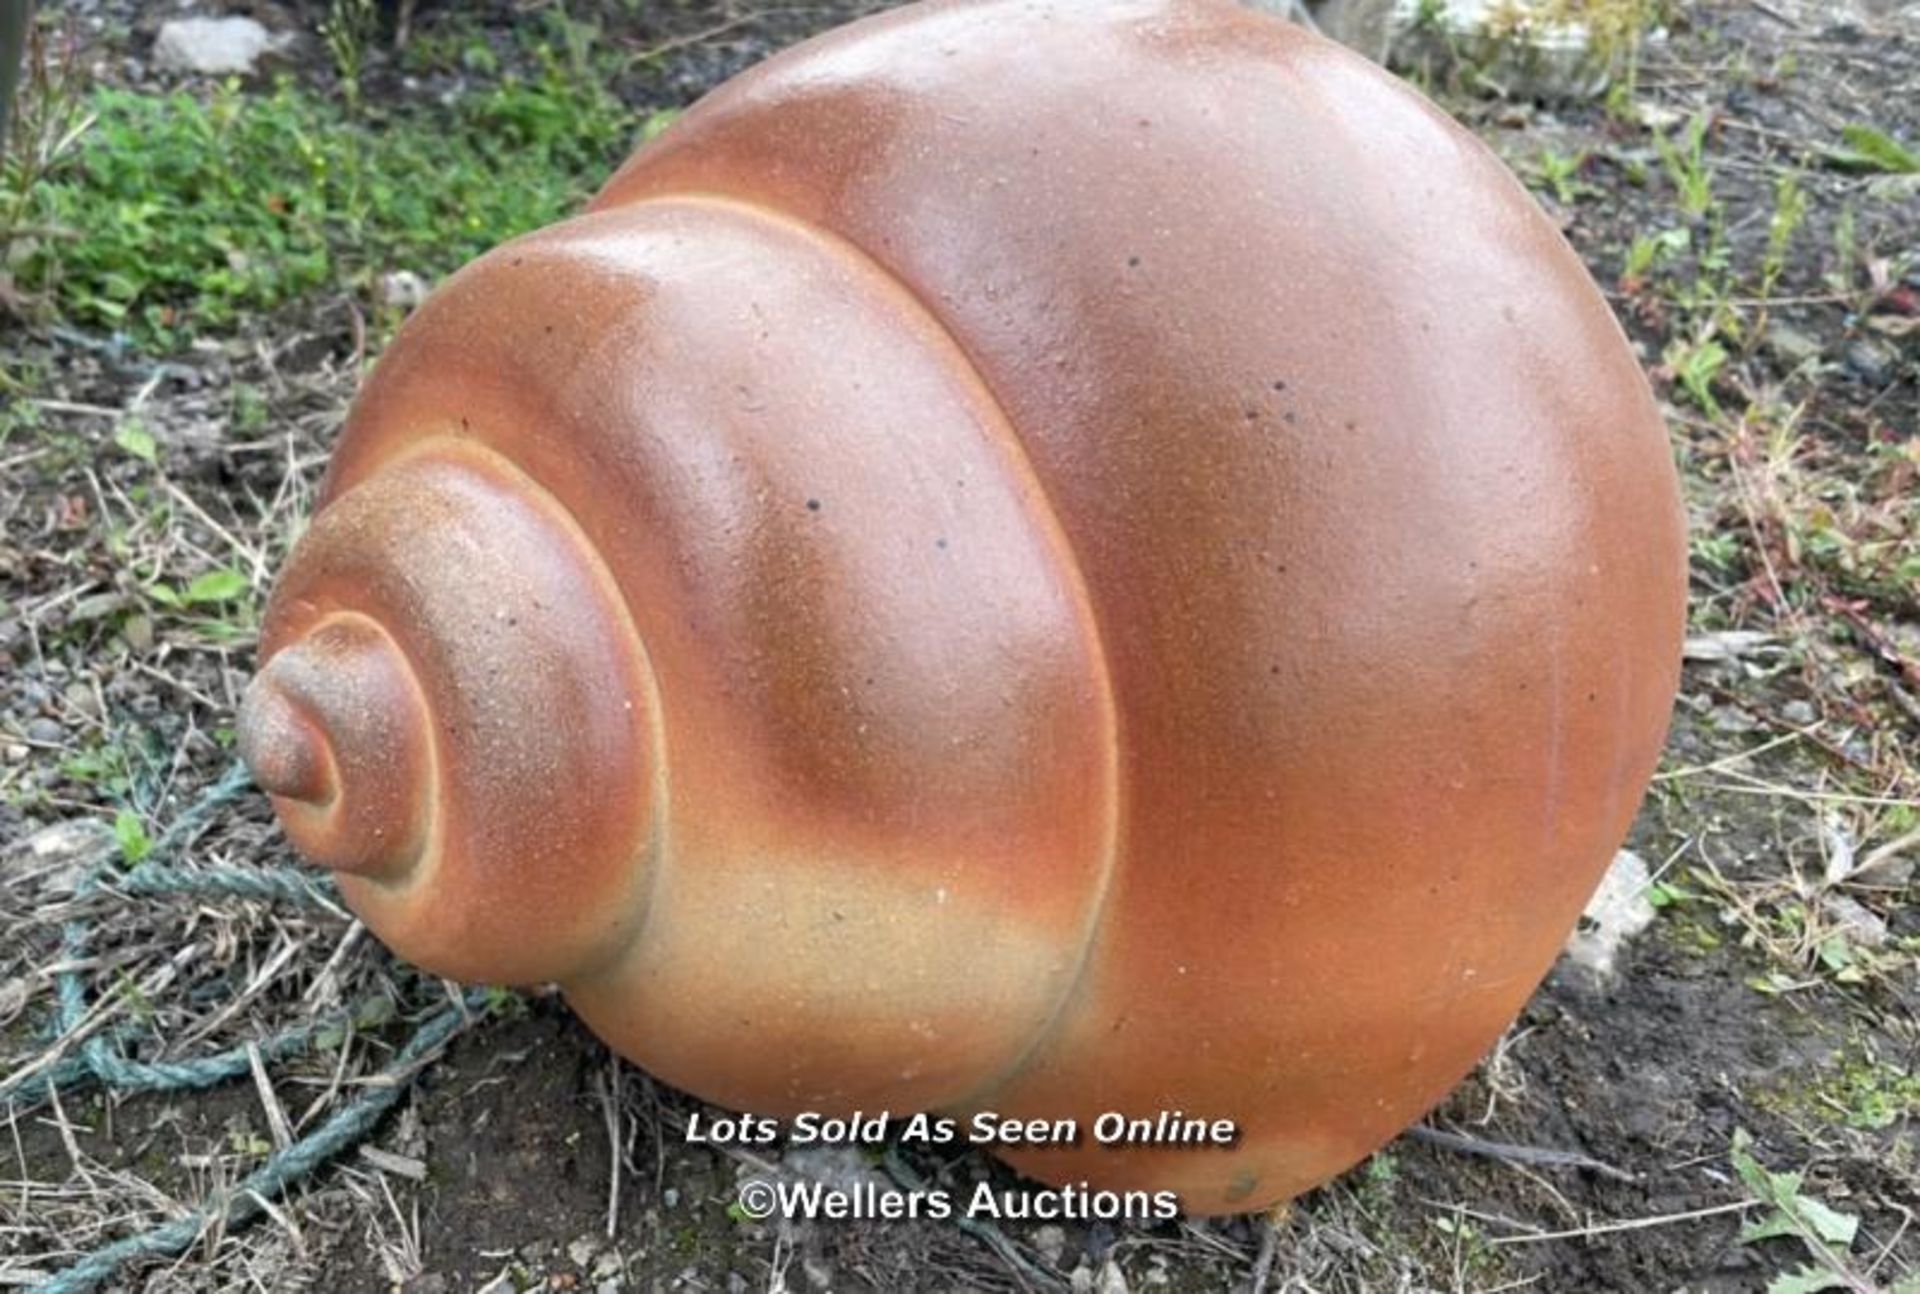 *CERAMIC SNAIL SHELL, 28CM (H) X 37CM (L) / COLLECTION LOCATION: ALBOURNE (BN6), FULL ADDRESS AND